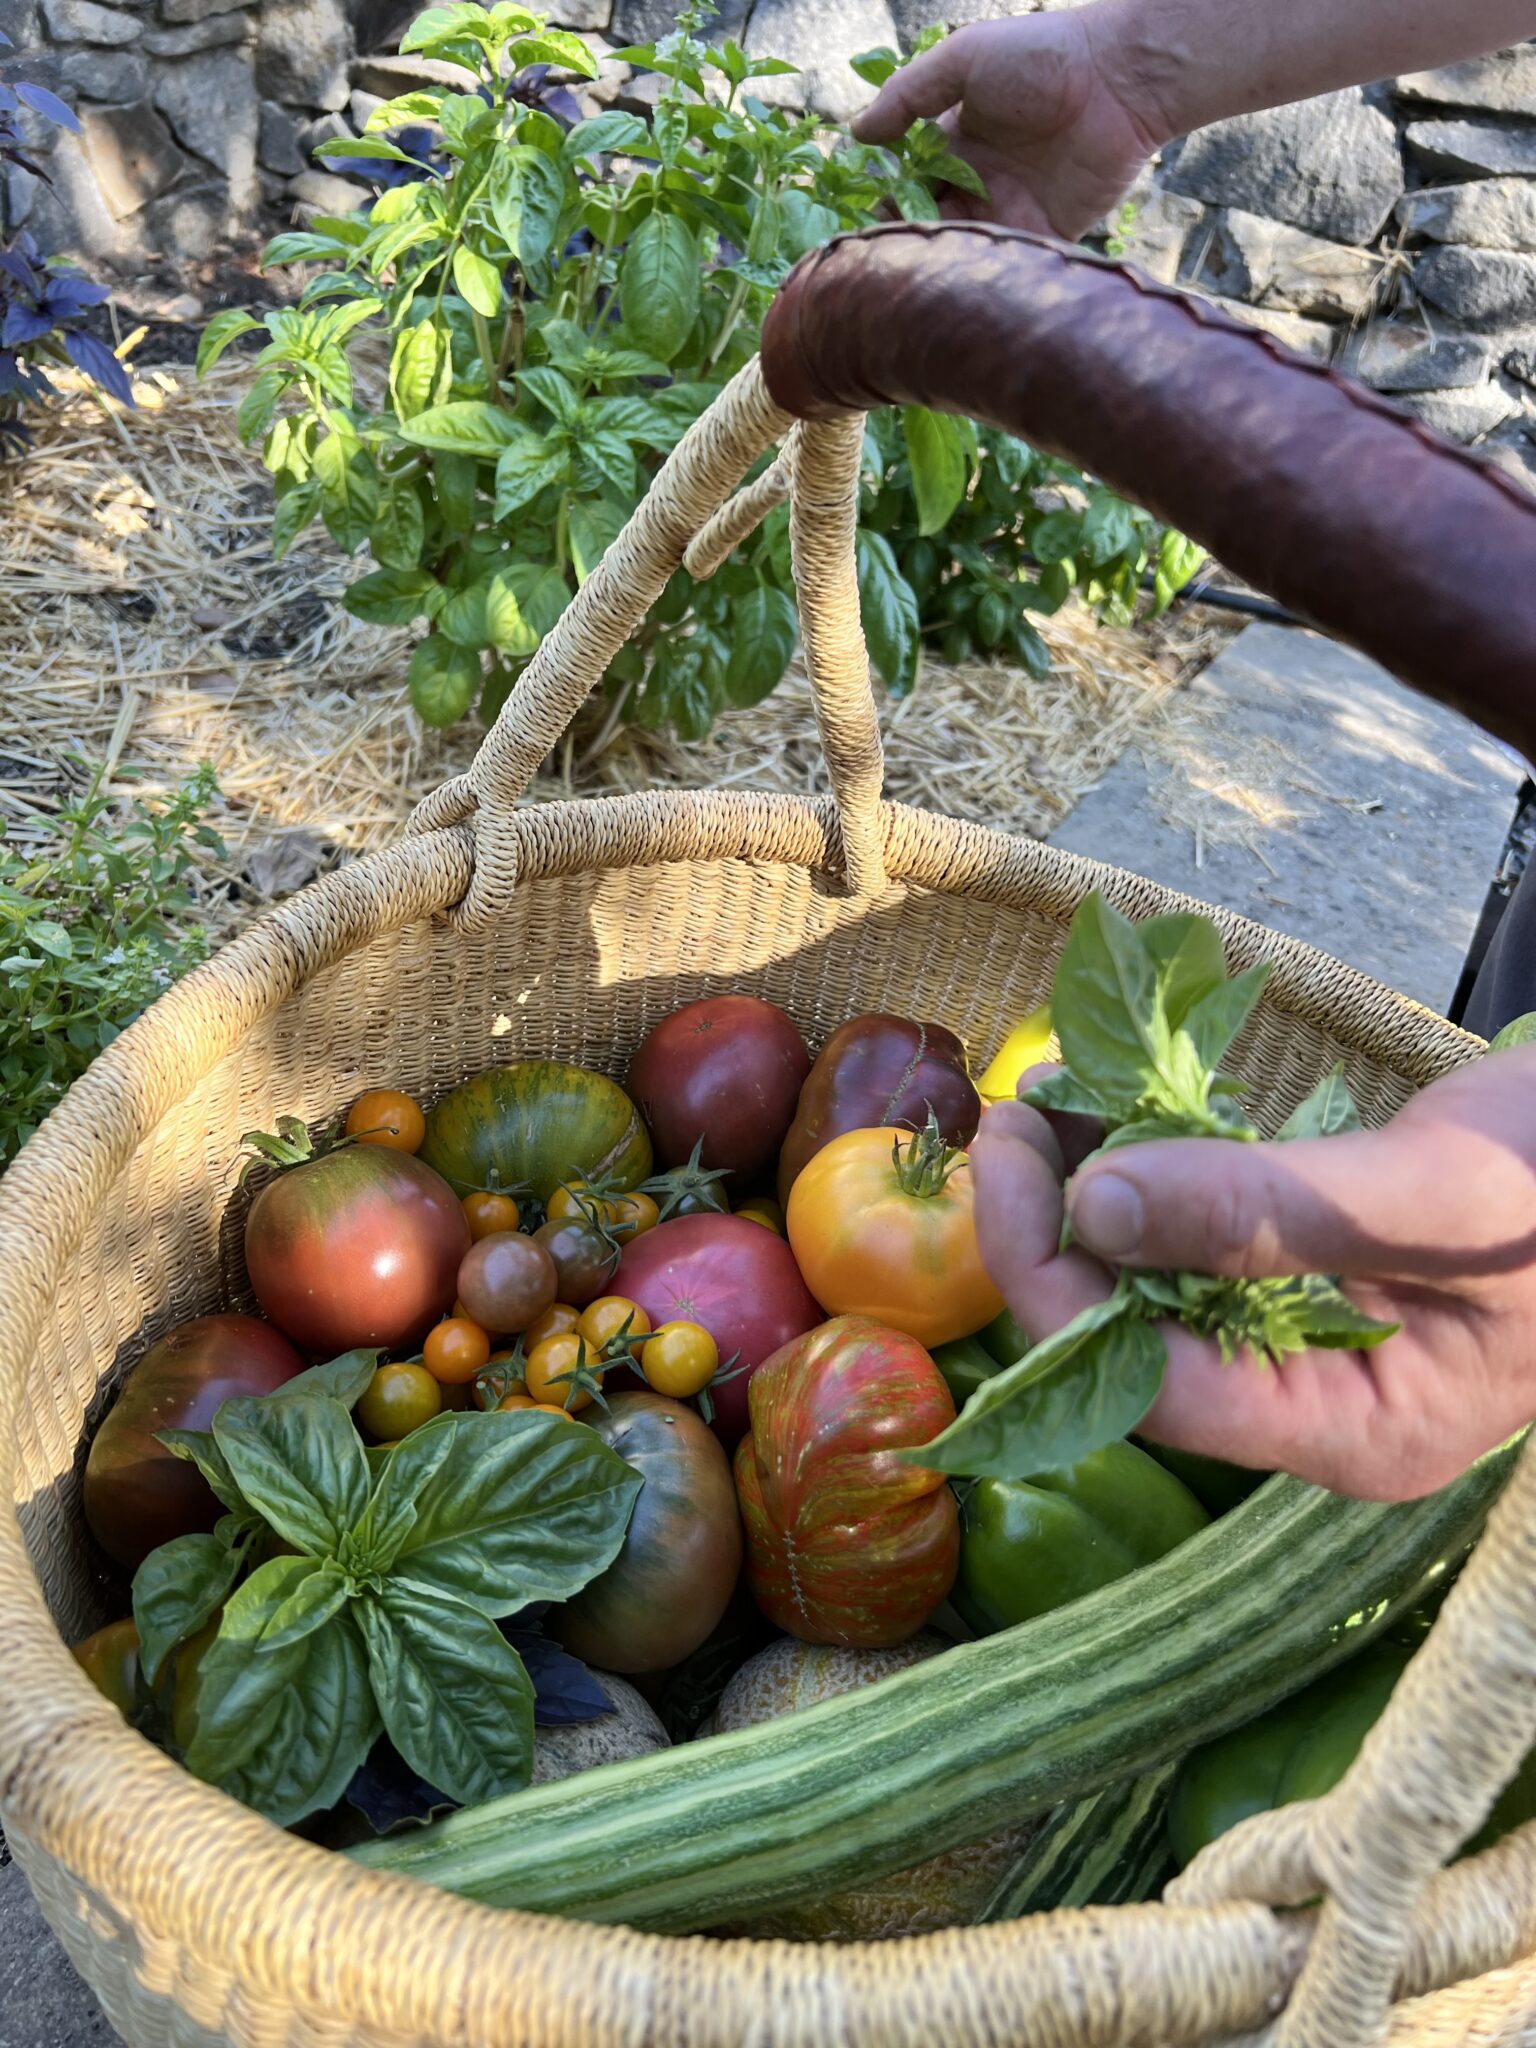 Basket of vegetables and herbs